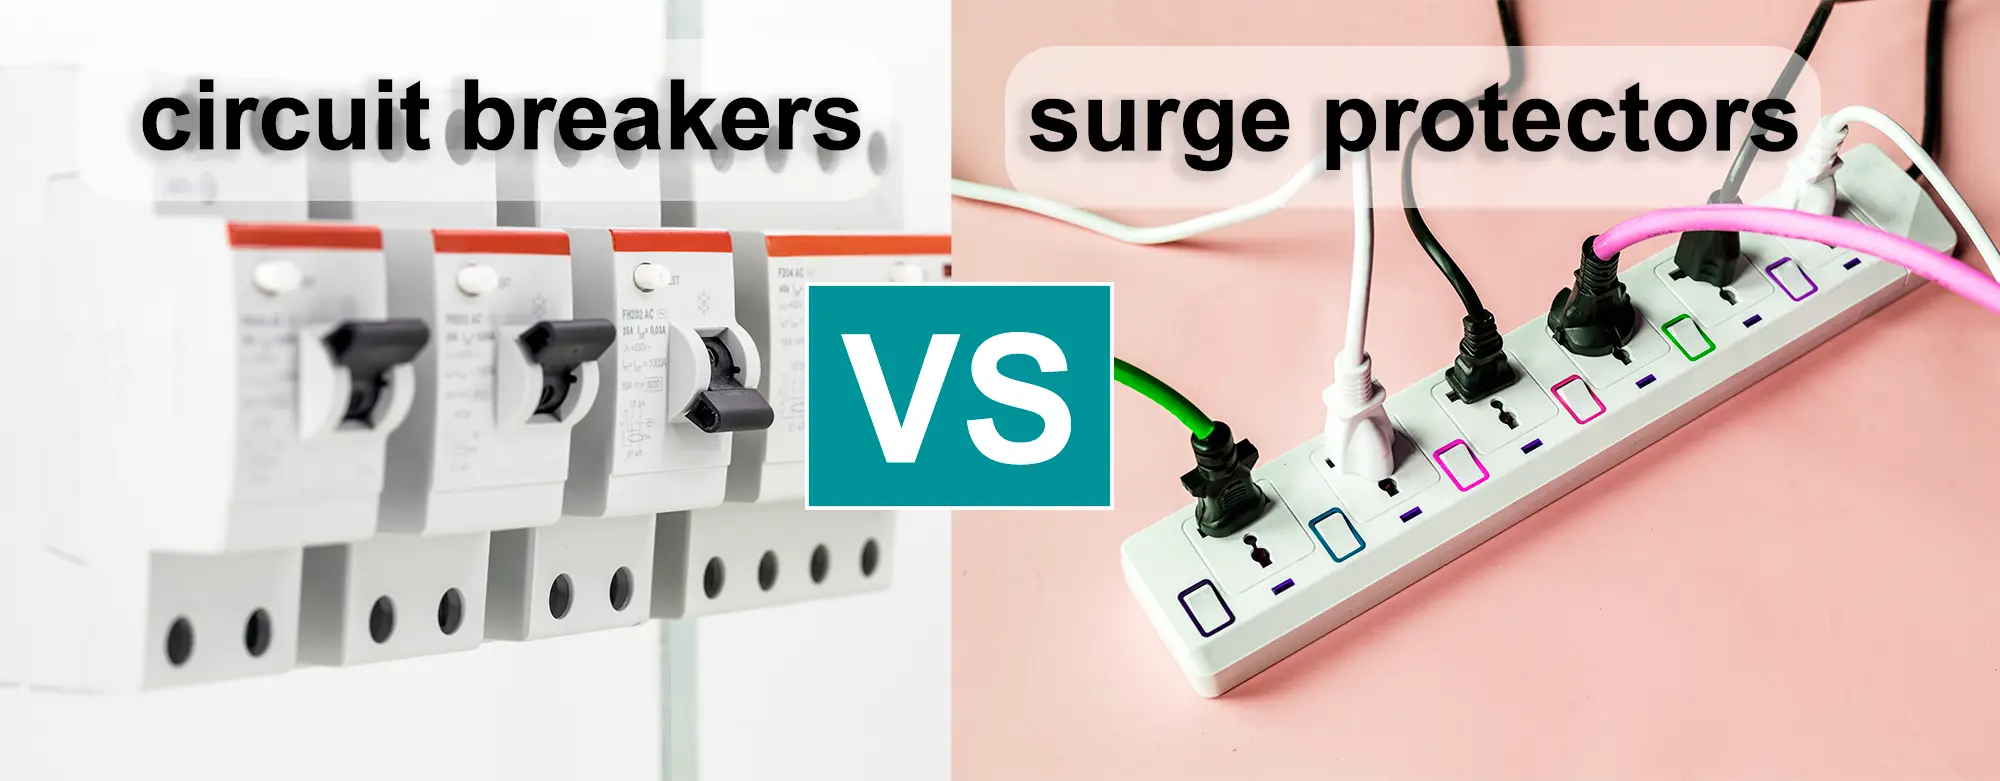 circuit breakers and surge protectors - surge protectors  and circuit breakers